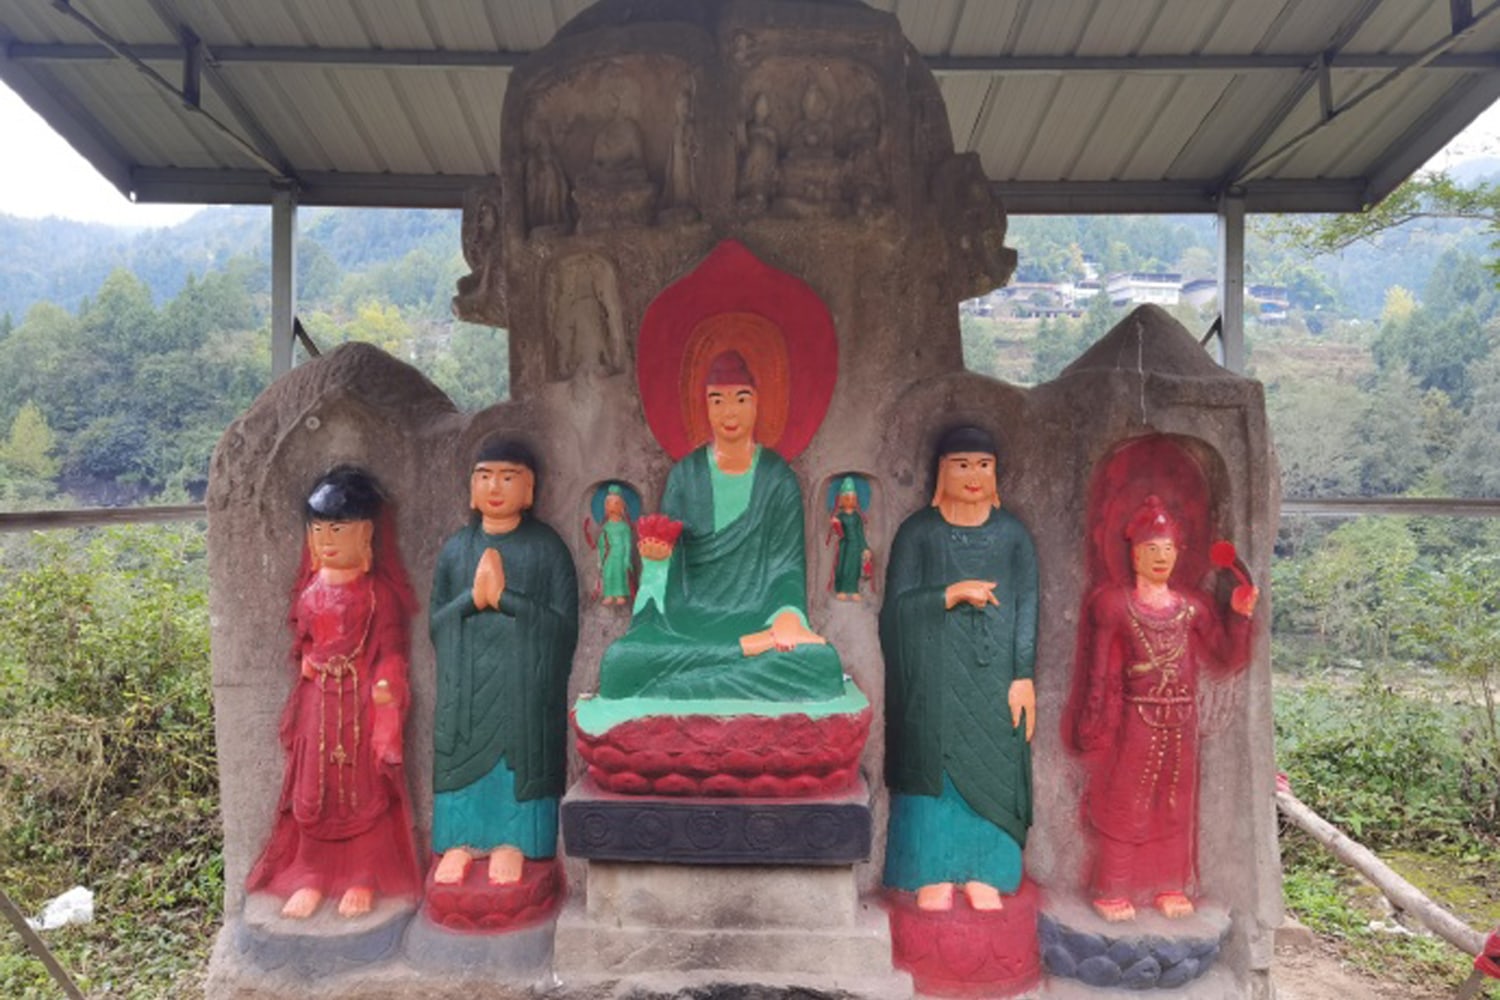 Chinese villagers paint 1,400-year-old Buddha statues to thank gods,  damaging artifacts